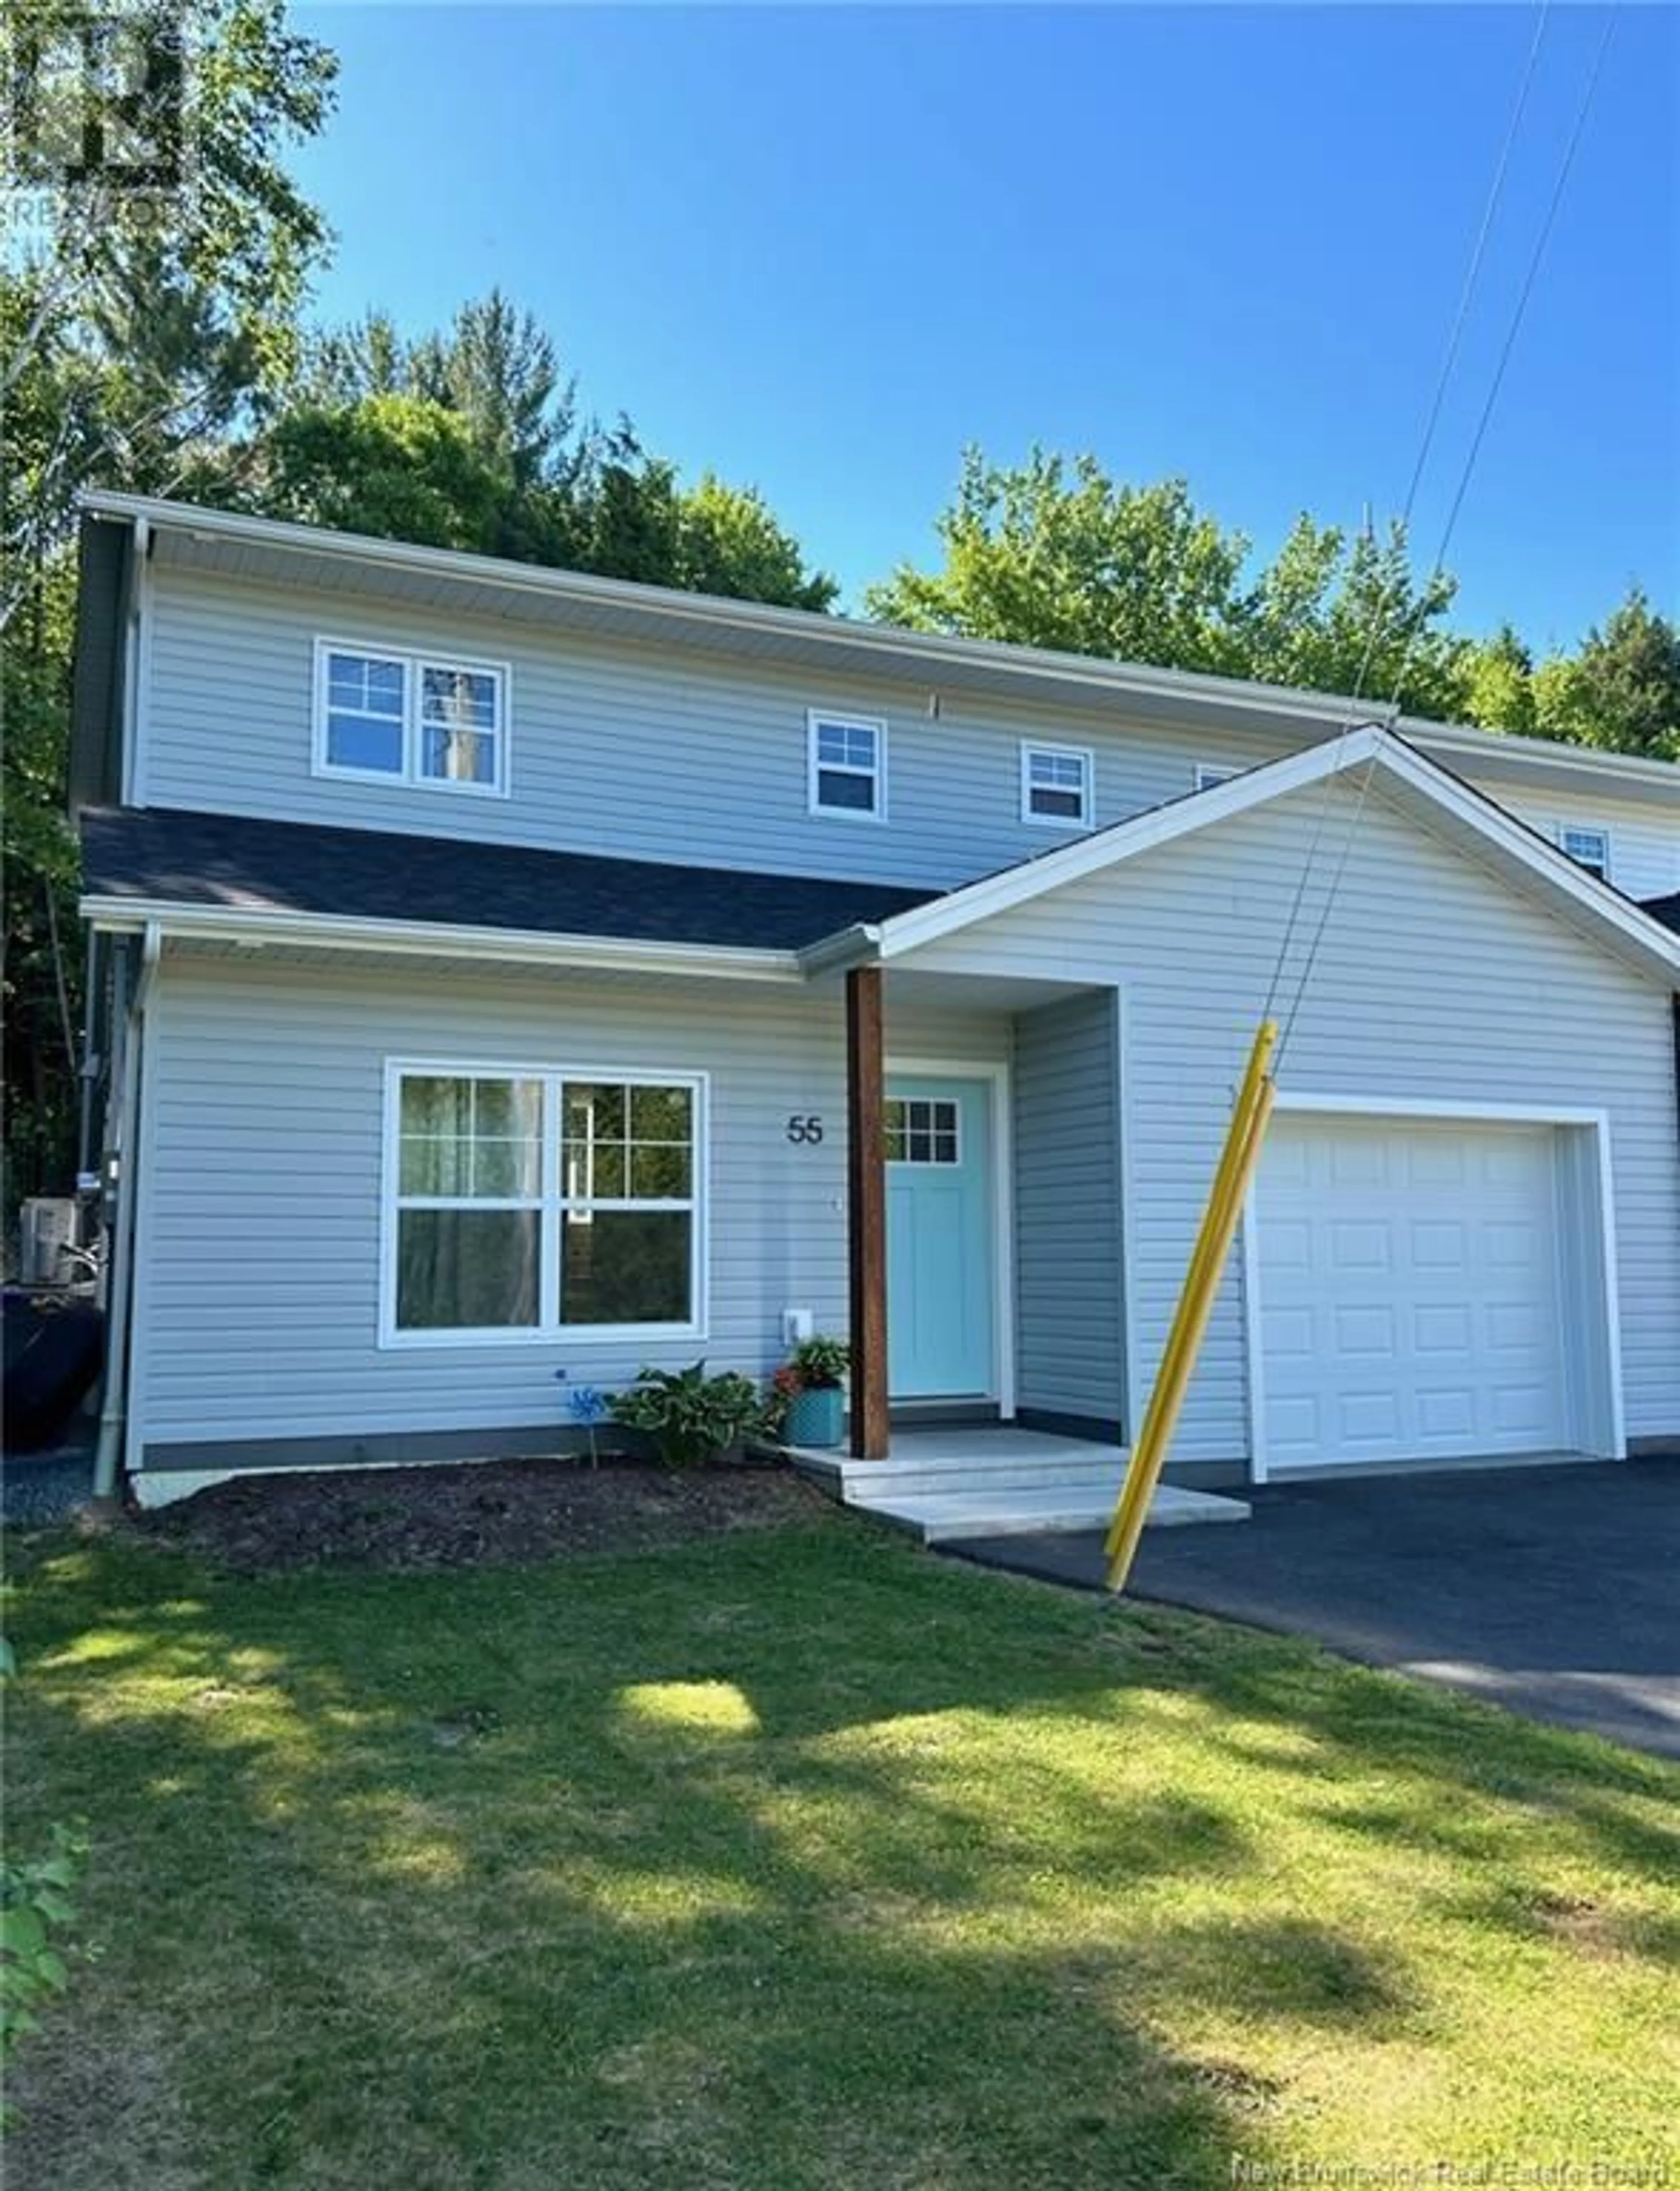 Home with vinyl exterior material for 55 Dewitt Acres, Fredericton New Brunswick E3A6S3